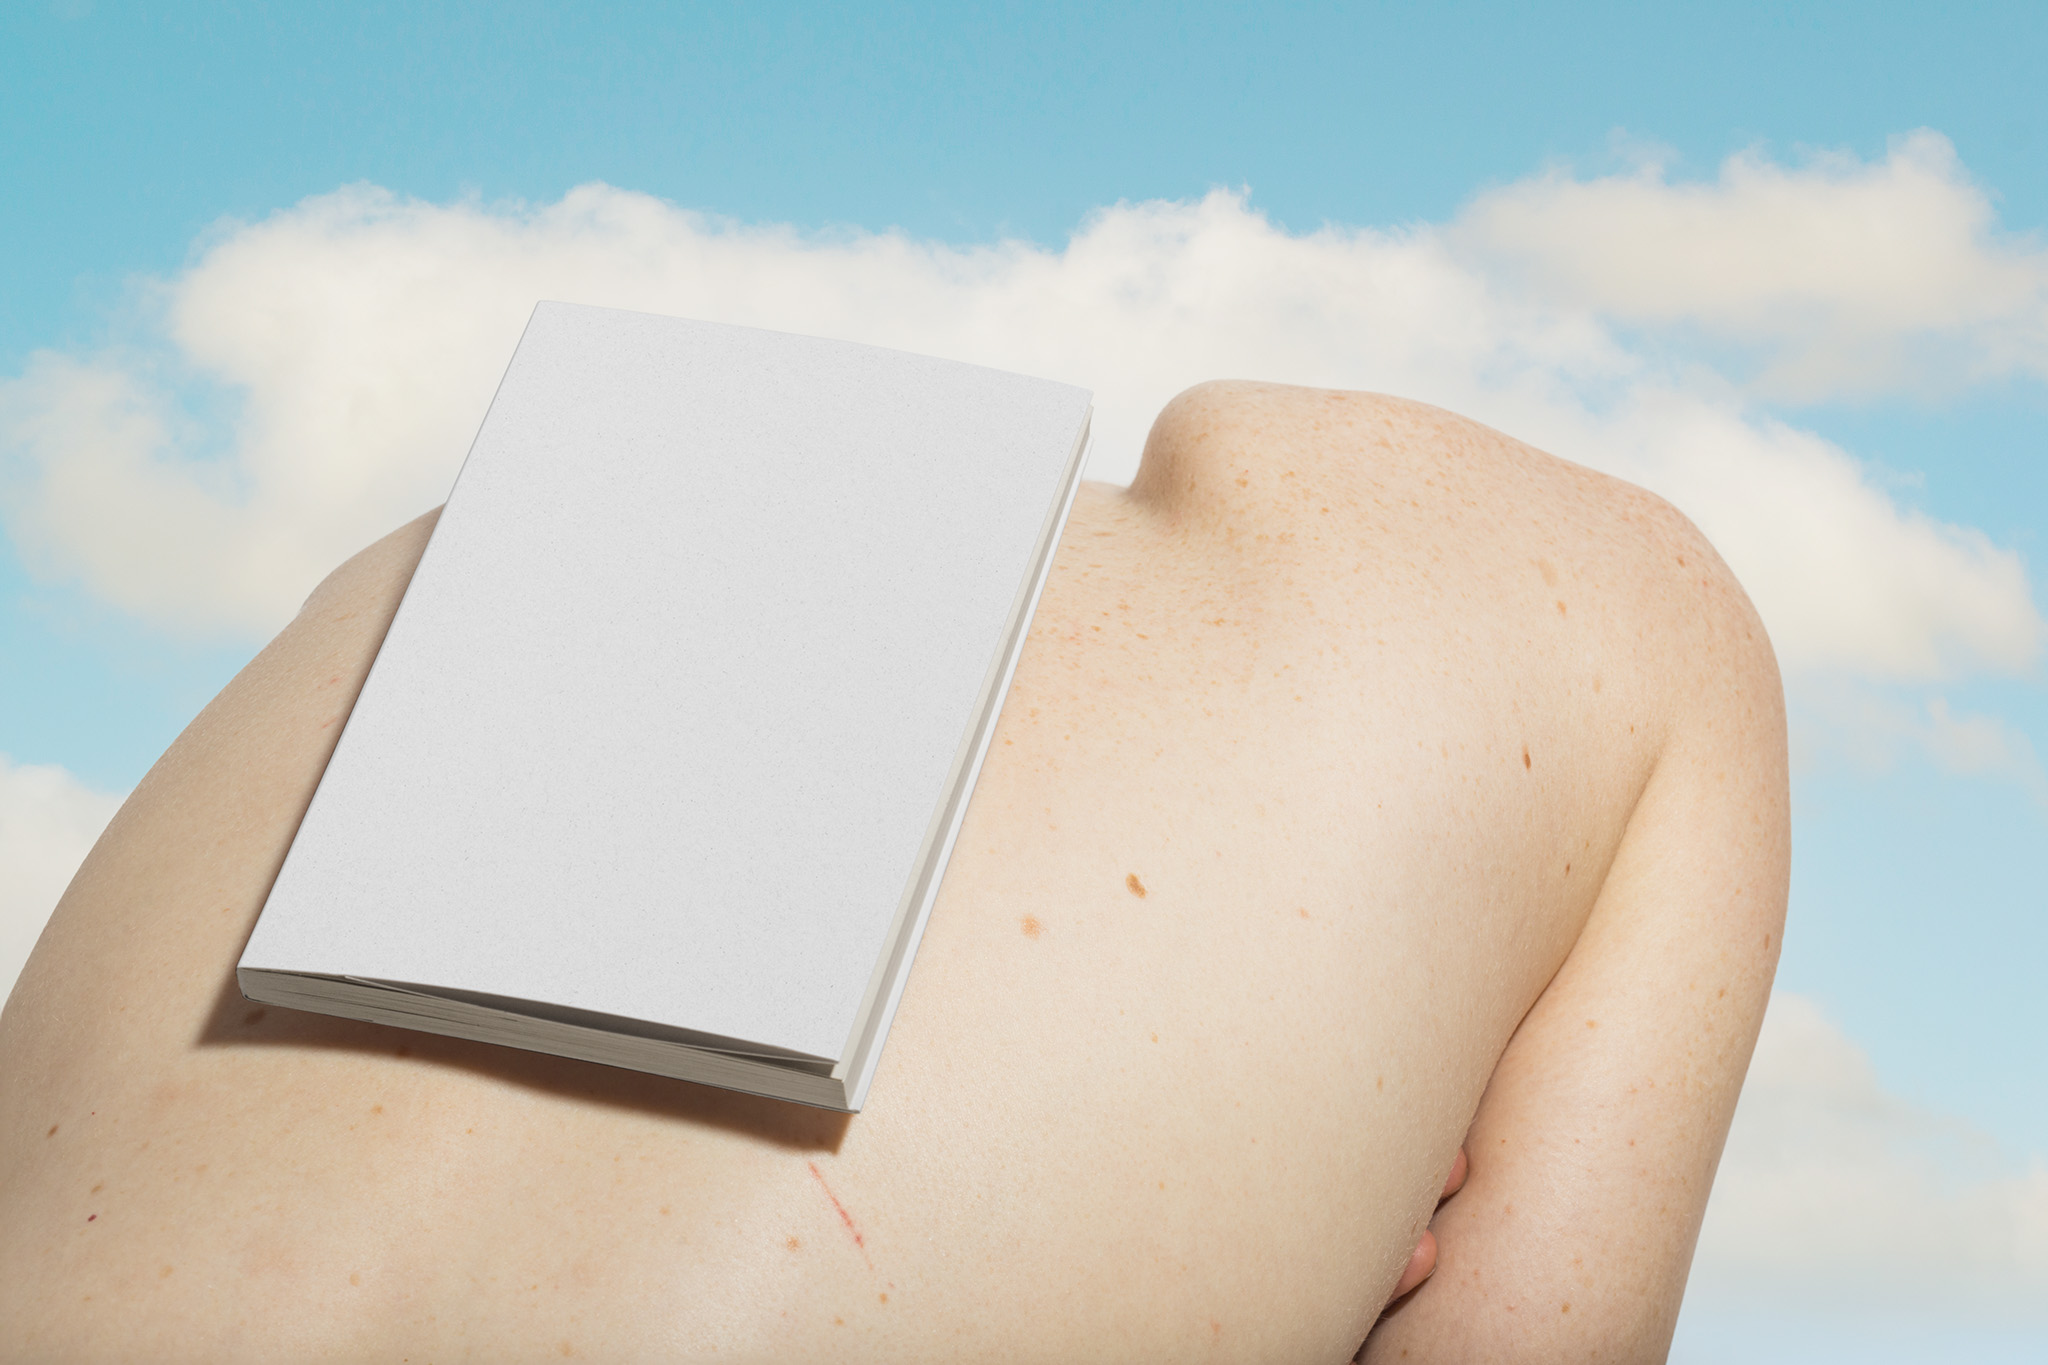 Slouched back bodyscape featuring an A5 book softcover mockup, set against a cloudy blue sky, empty mockup.